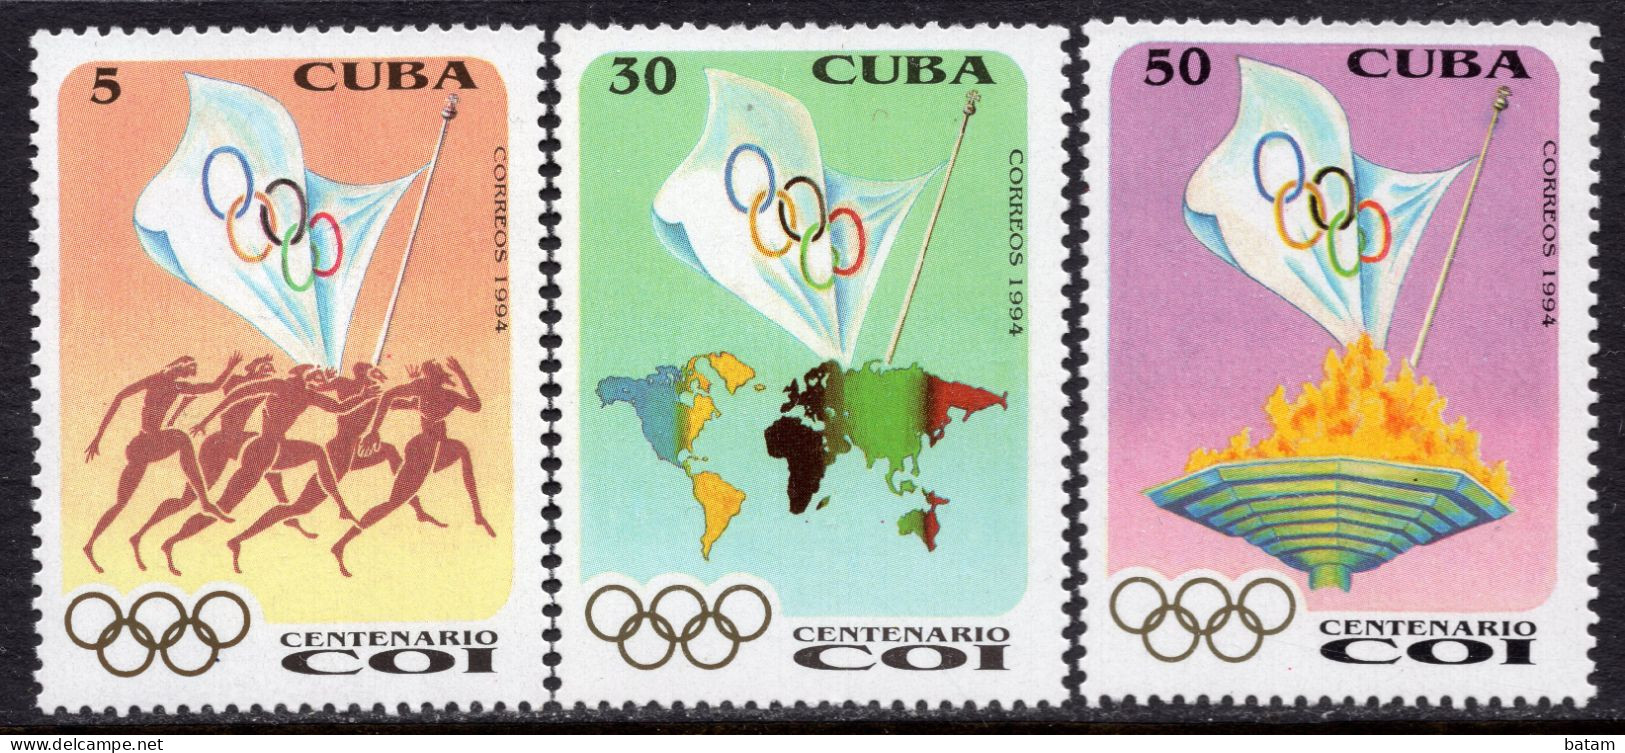 Cuba 1994 - The 100th Ann. Of The International Olympic Committee - Flag-MNH Set - Unused Stamps